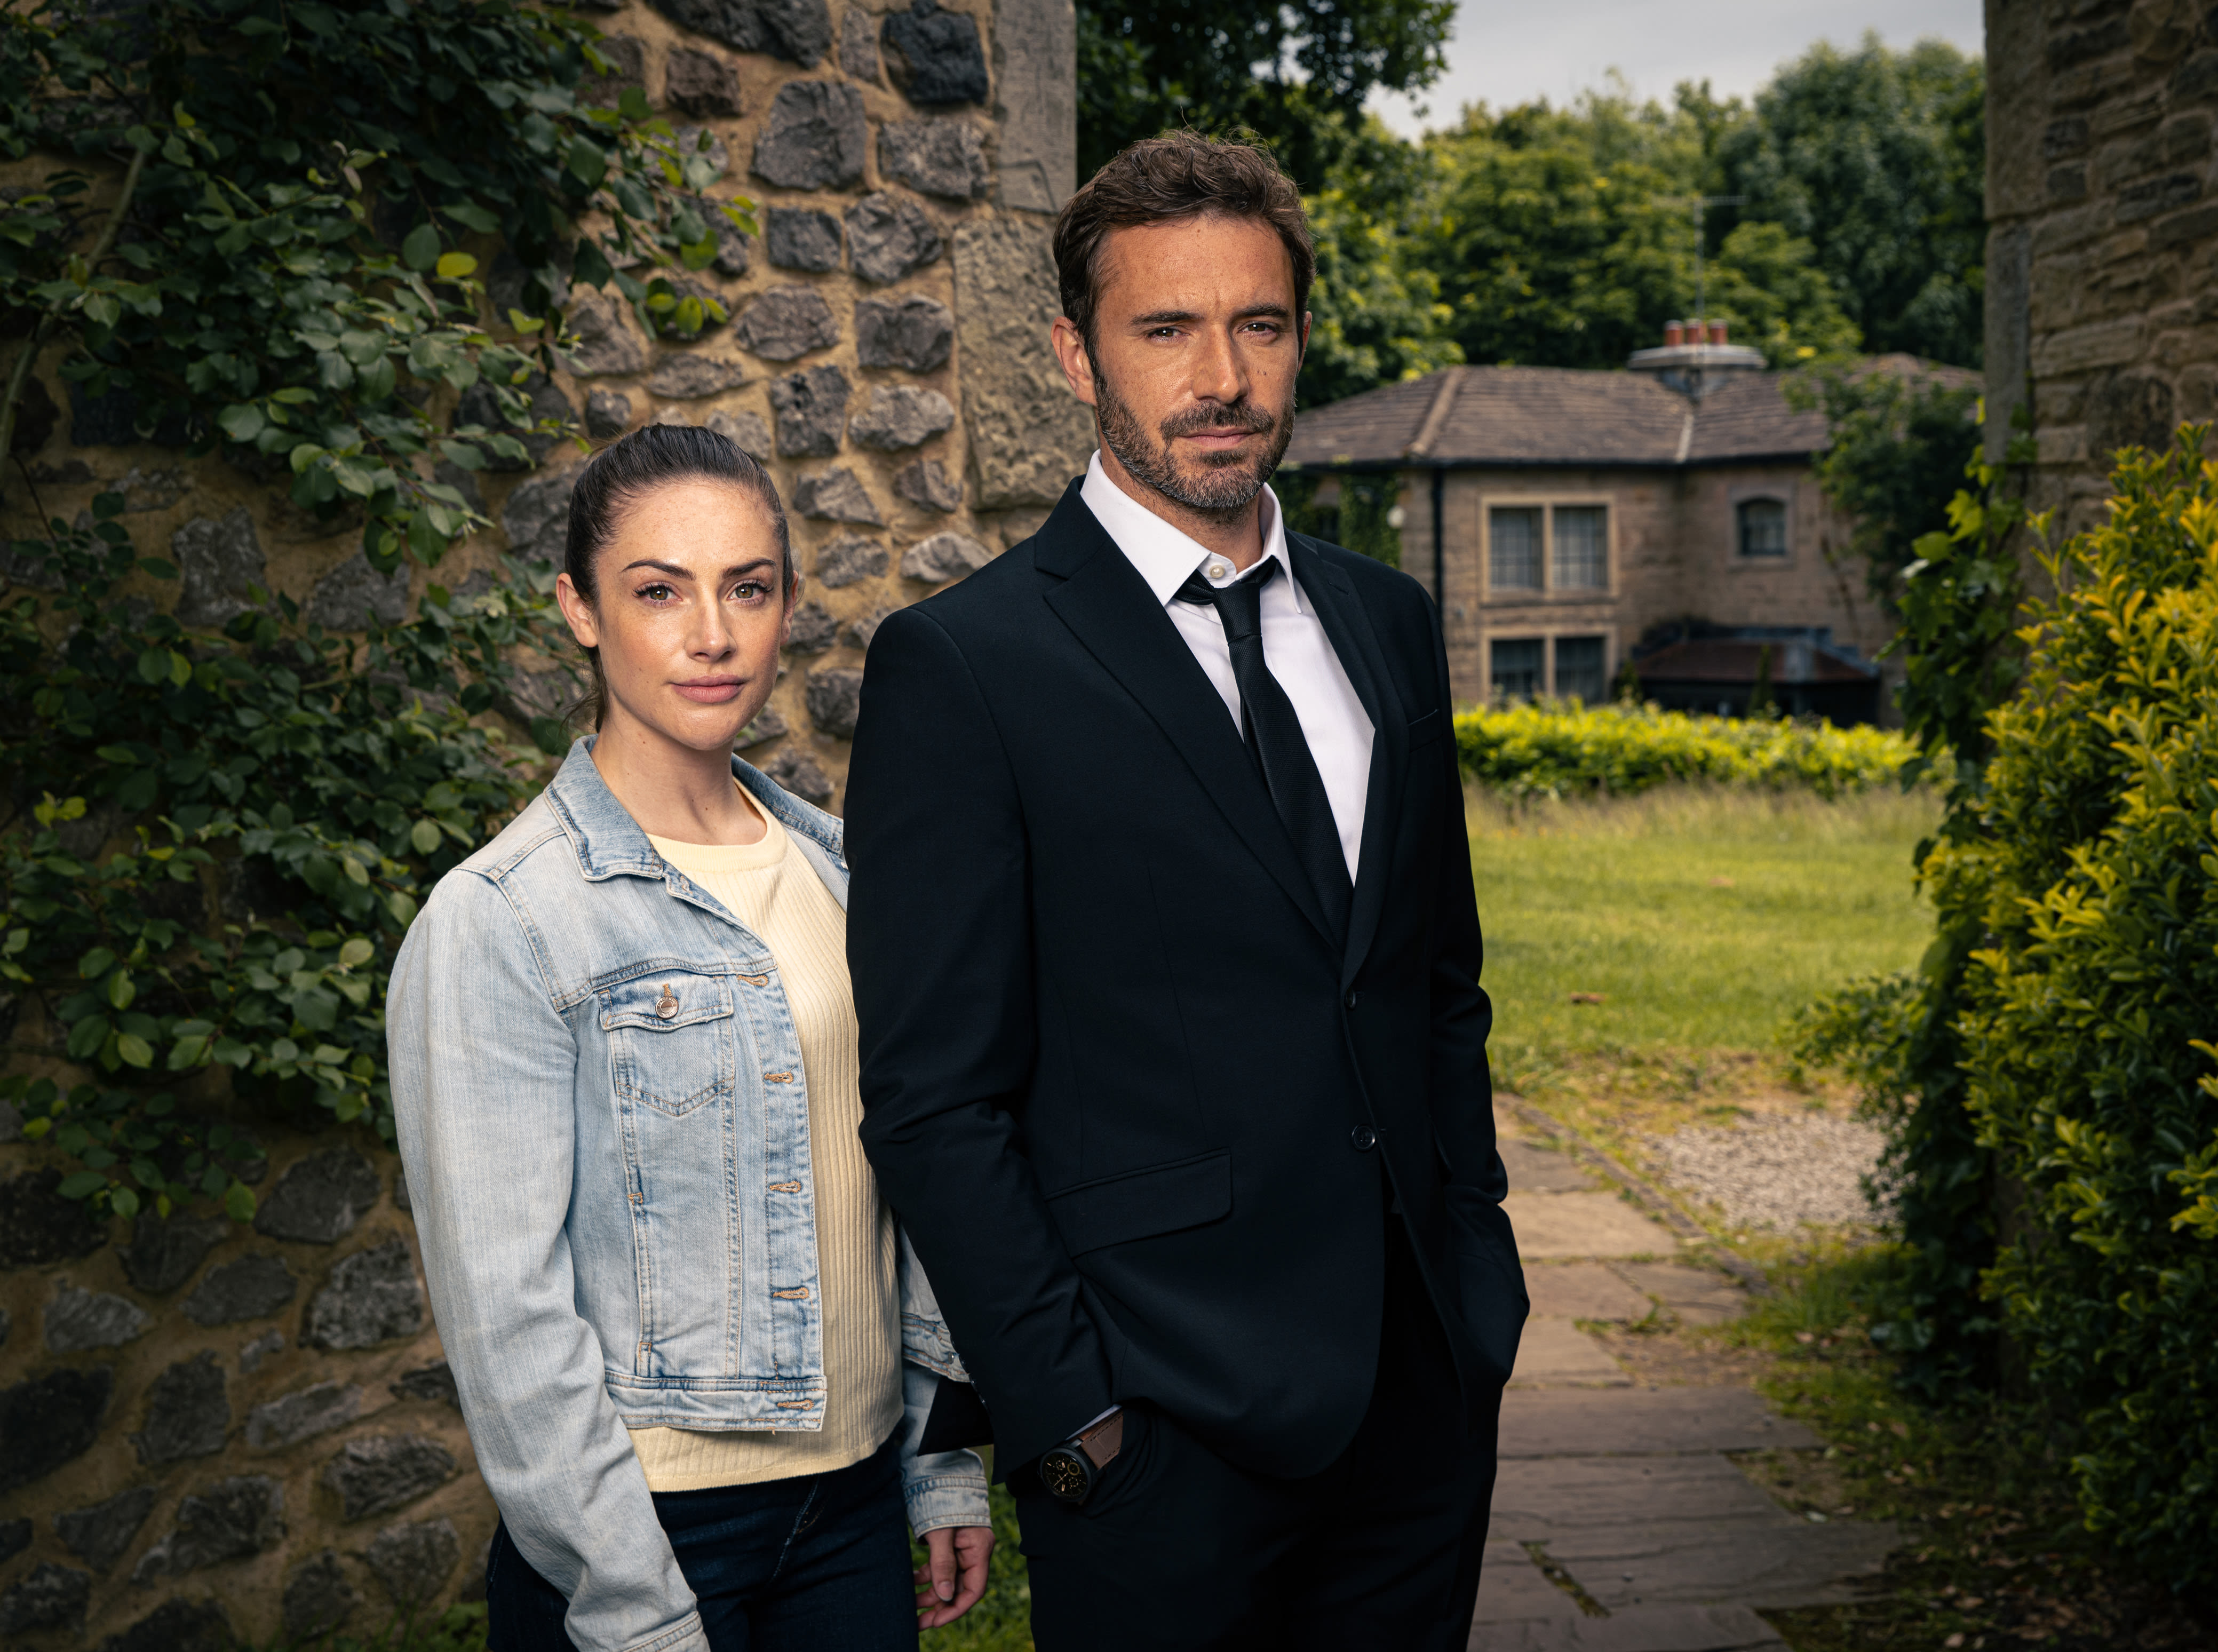 Emmerdale spoilers: Does Victoria have a long-lost brother?